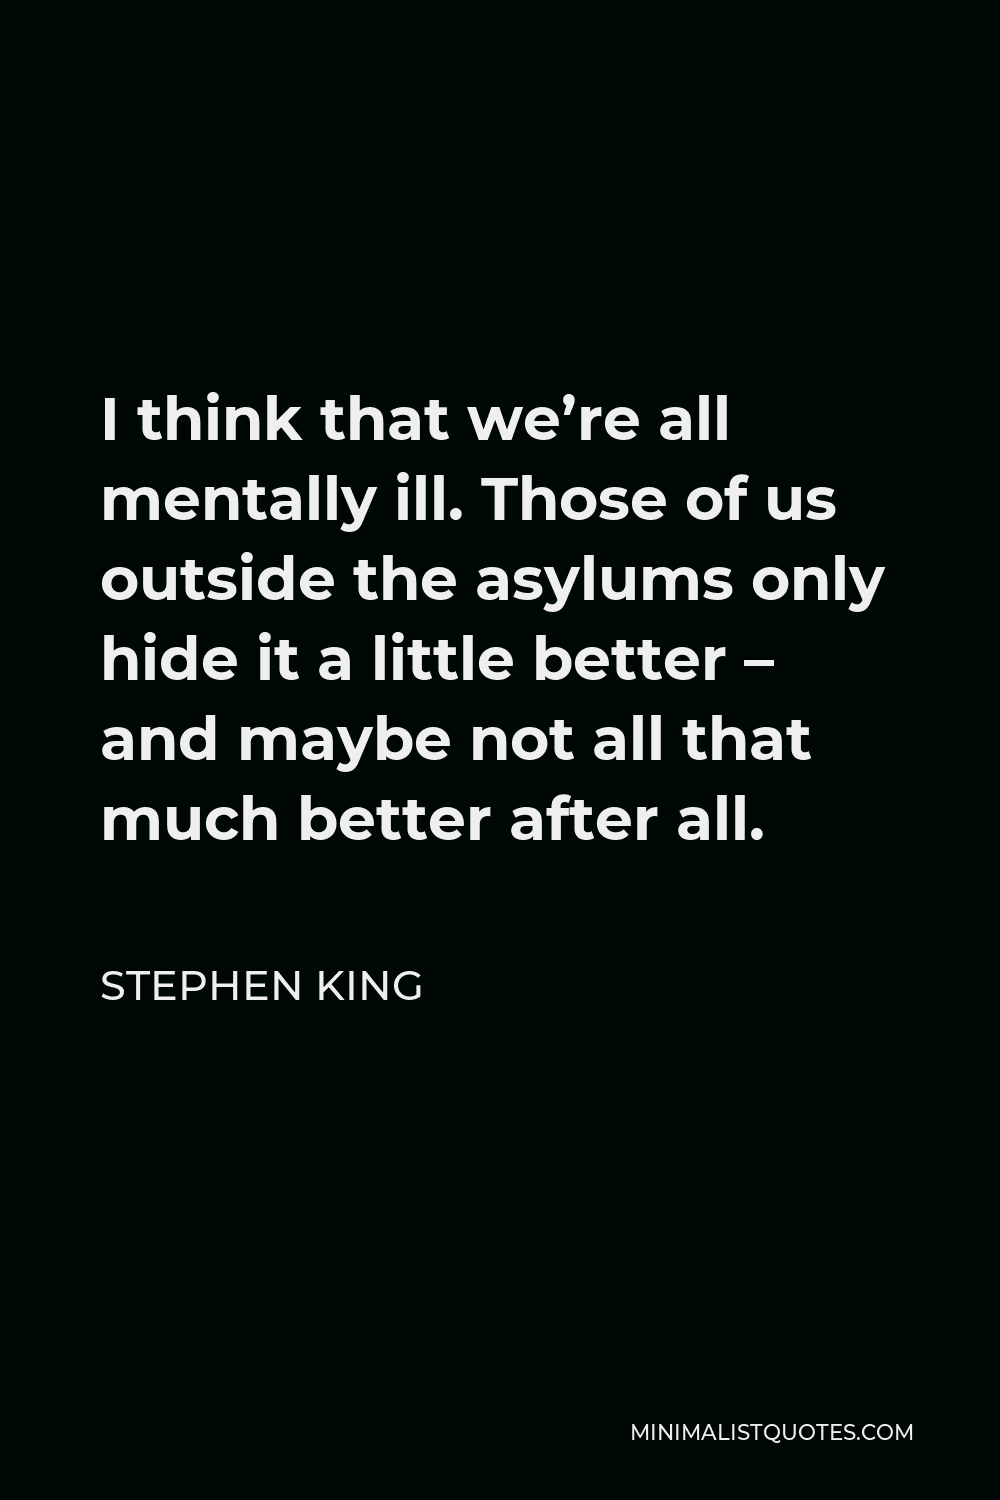 Stephen King Quote - I think that we’re all mentally ill. Those of us outside the asylums only hide it a little better – and maybe not all that much better after all.